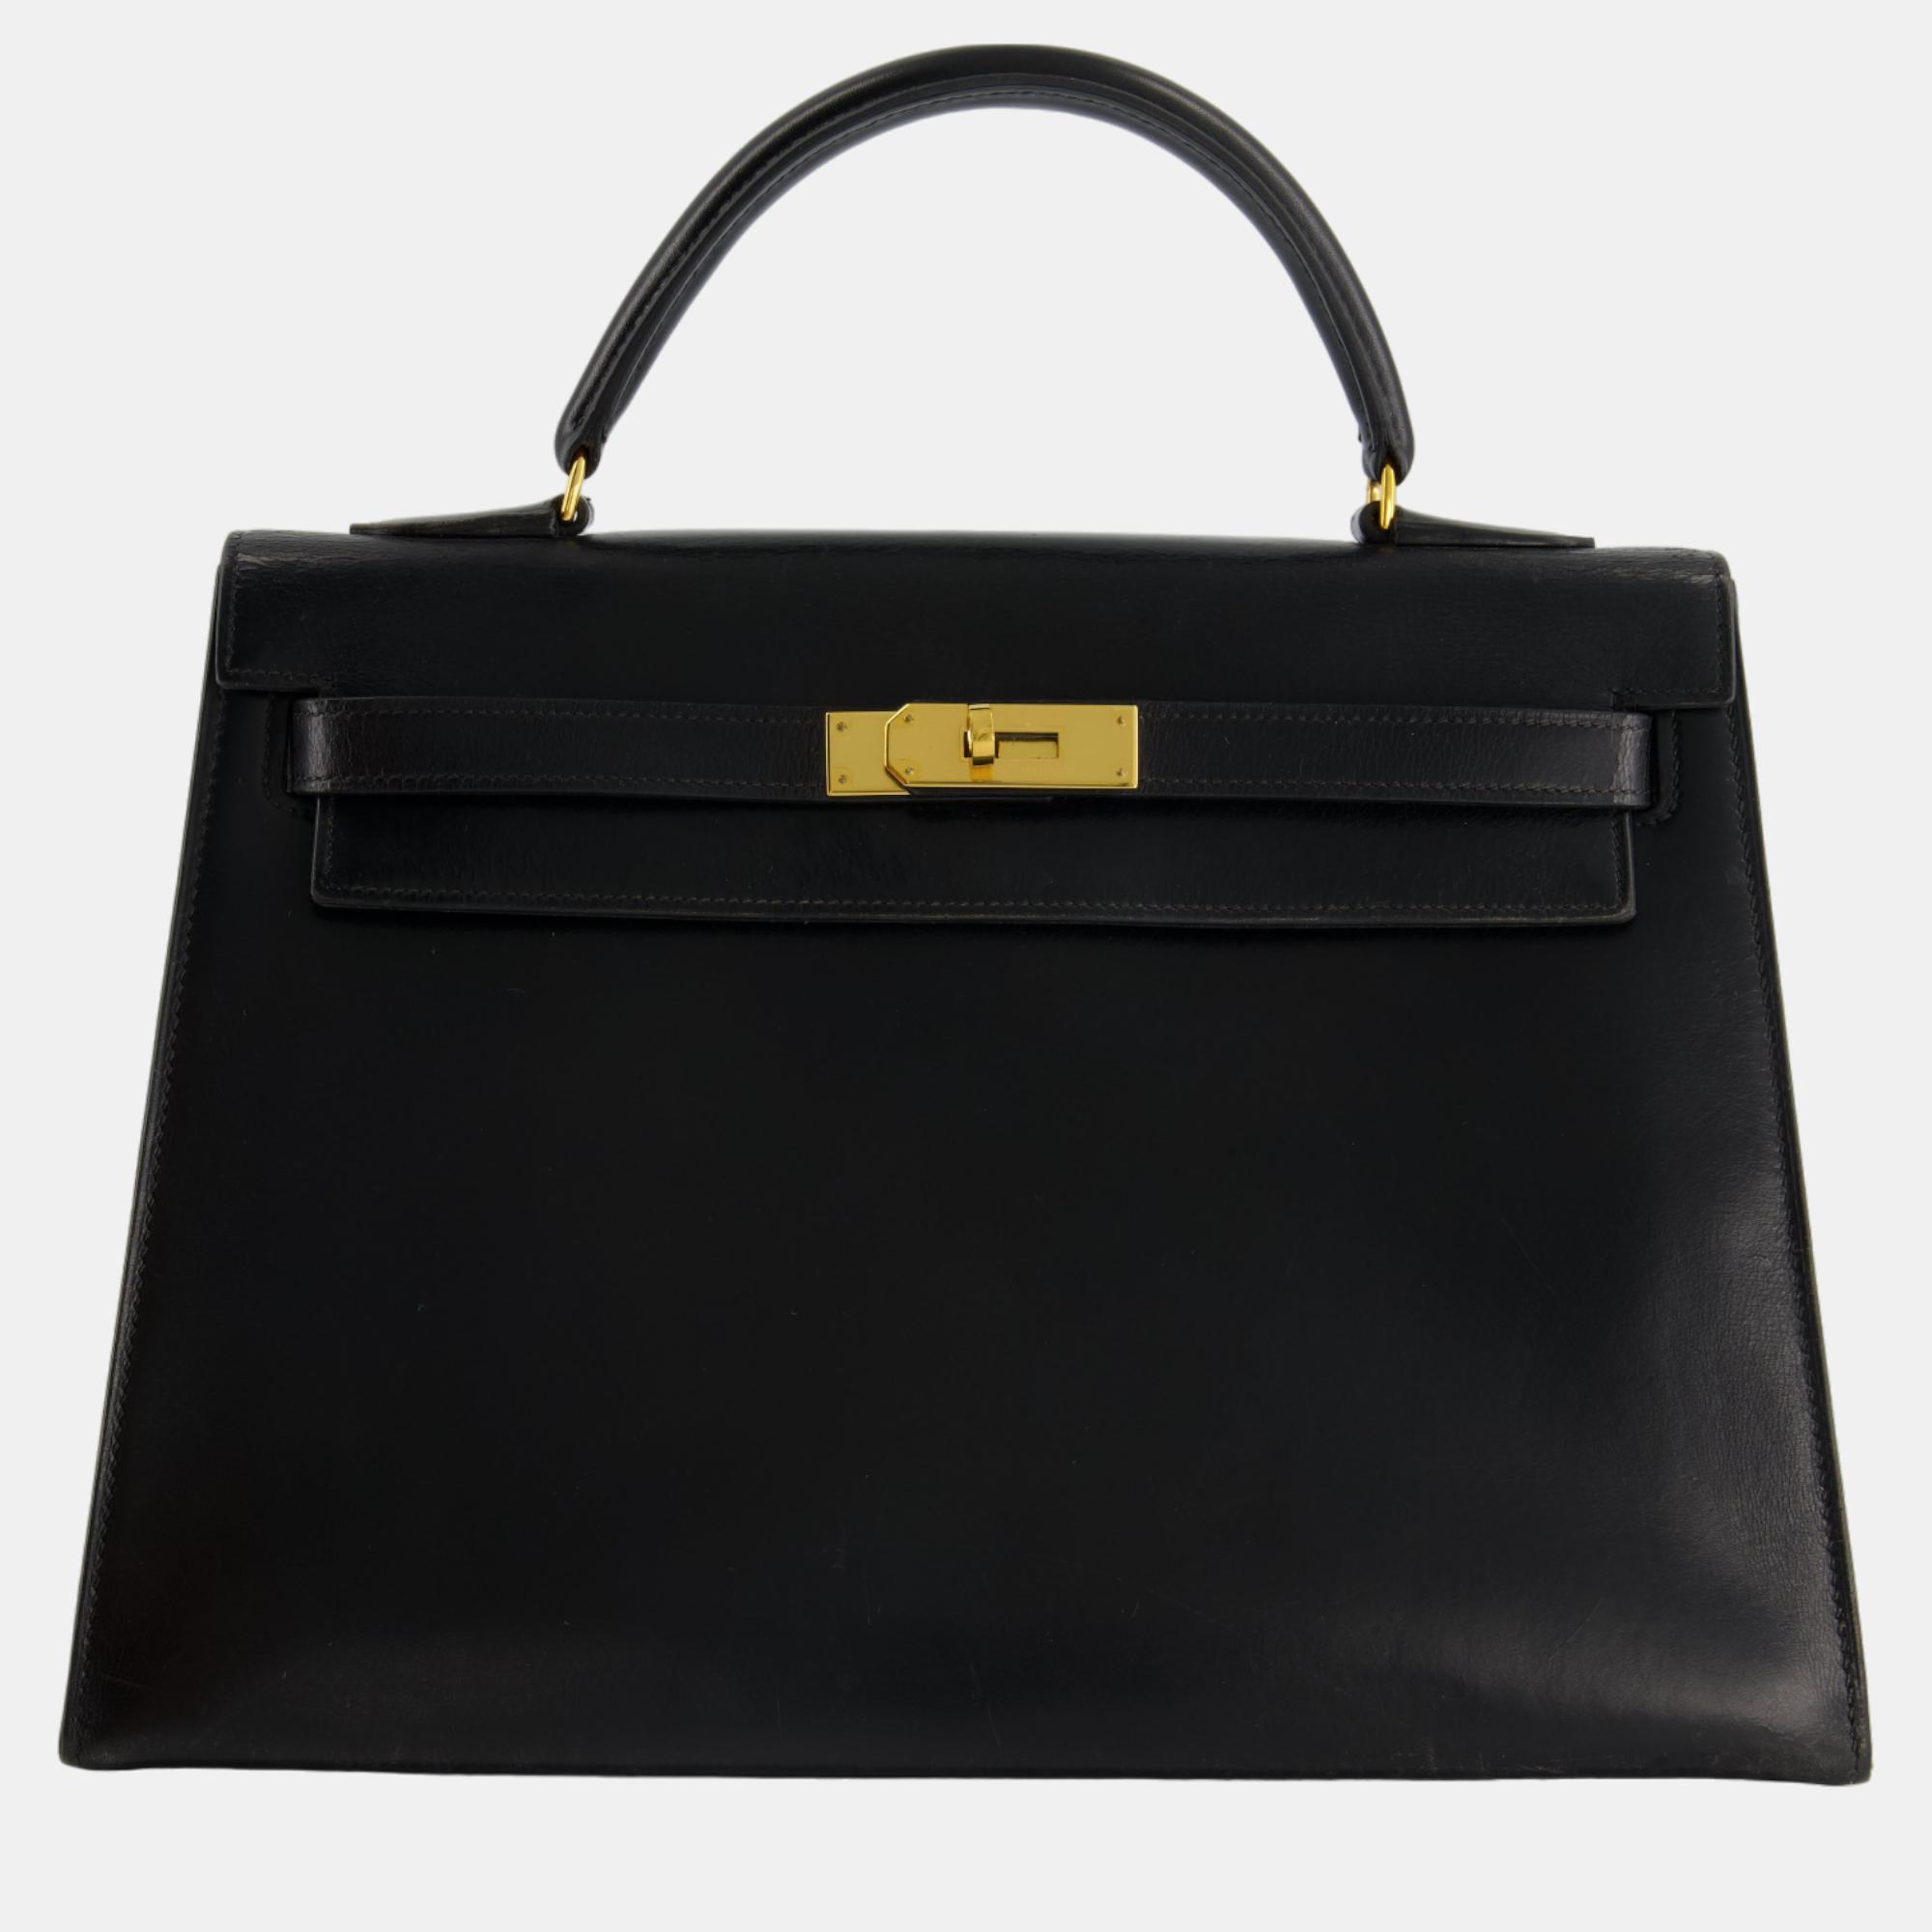 Hermes vintage kelly bag 32cm  in black box calf leather with gold hardware